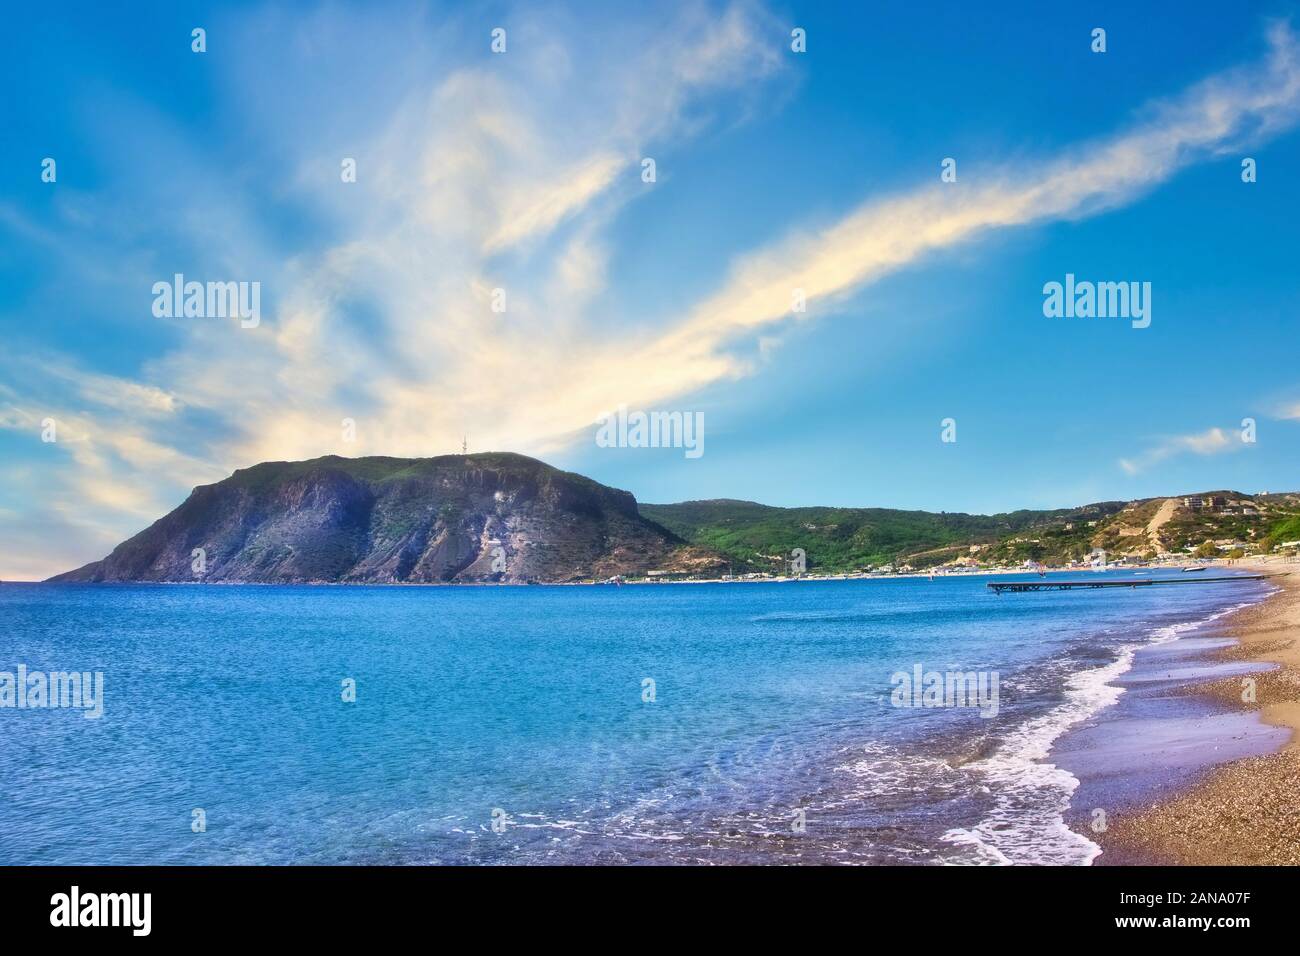 Horizontal photo with view on rock in Agios Stefanos Bay beach on famous Greek Kos island. Sky is blue with few clouds. Beach sandy with small stones. Stock Photo